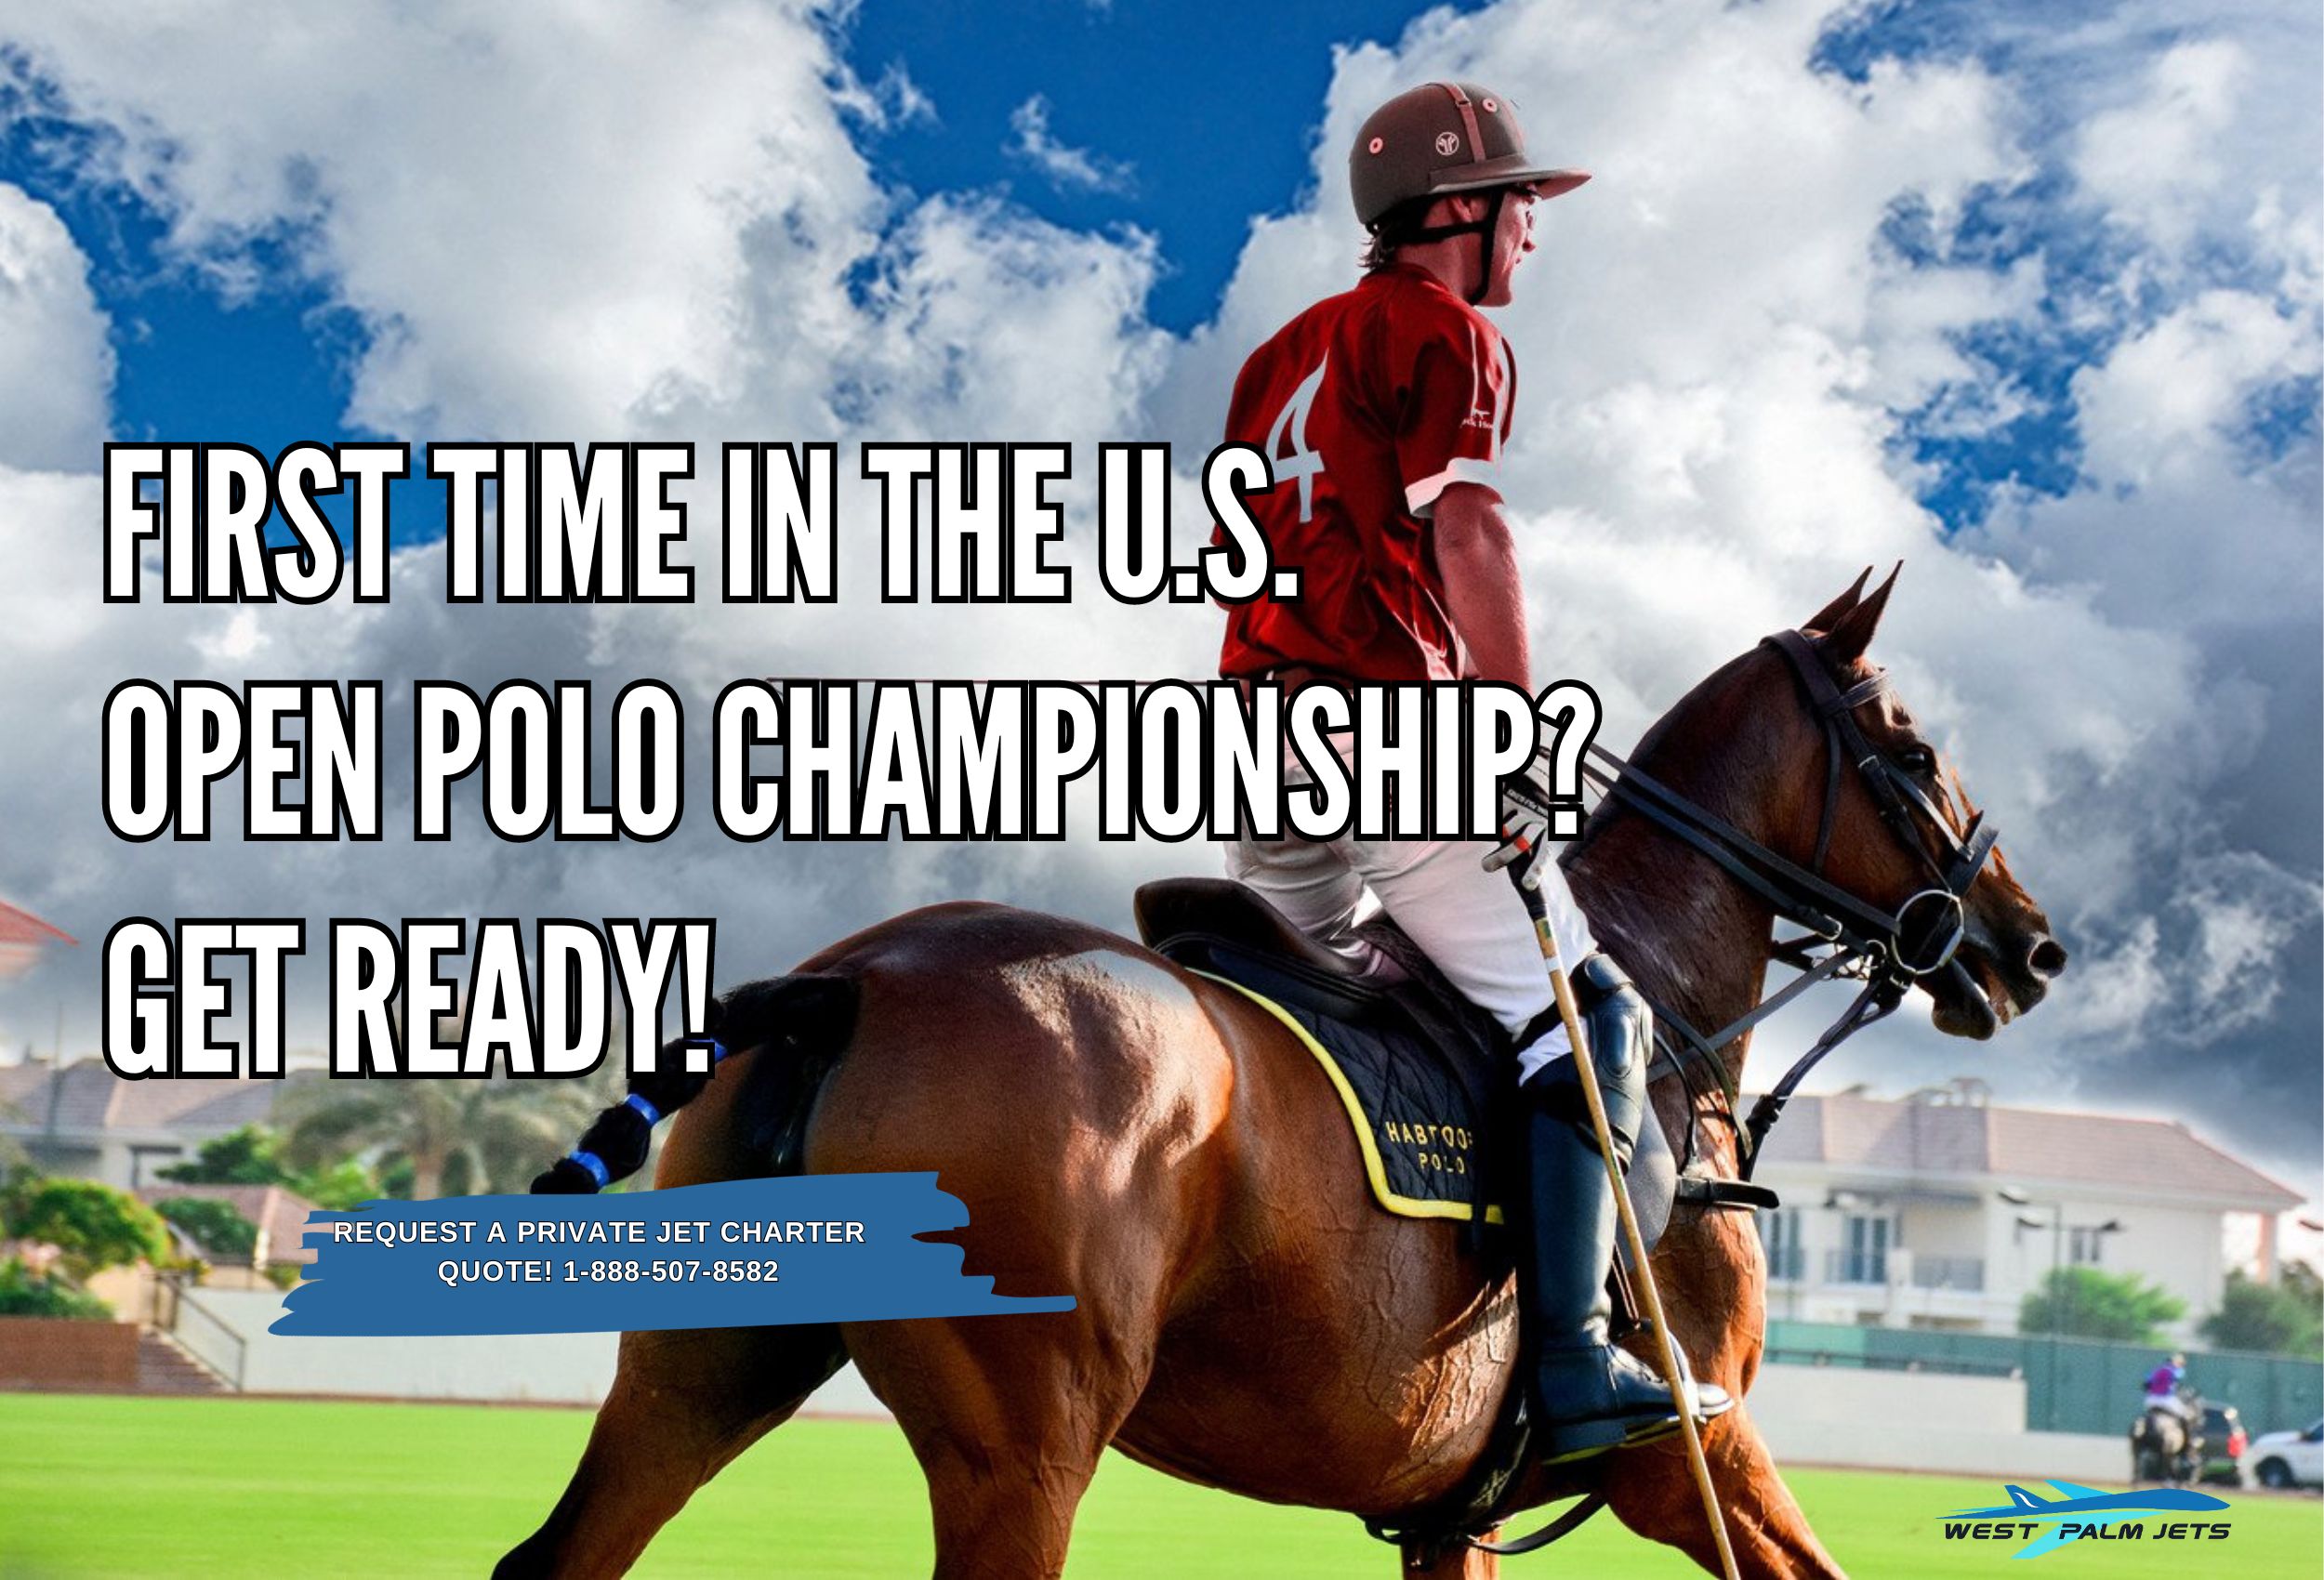 First Time In The U.S. Open Polo Championship Get Ready!